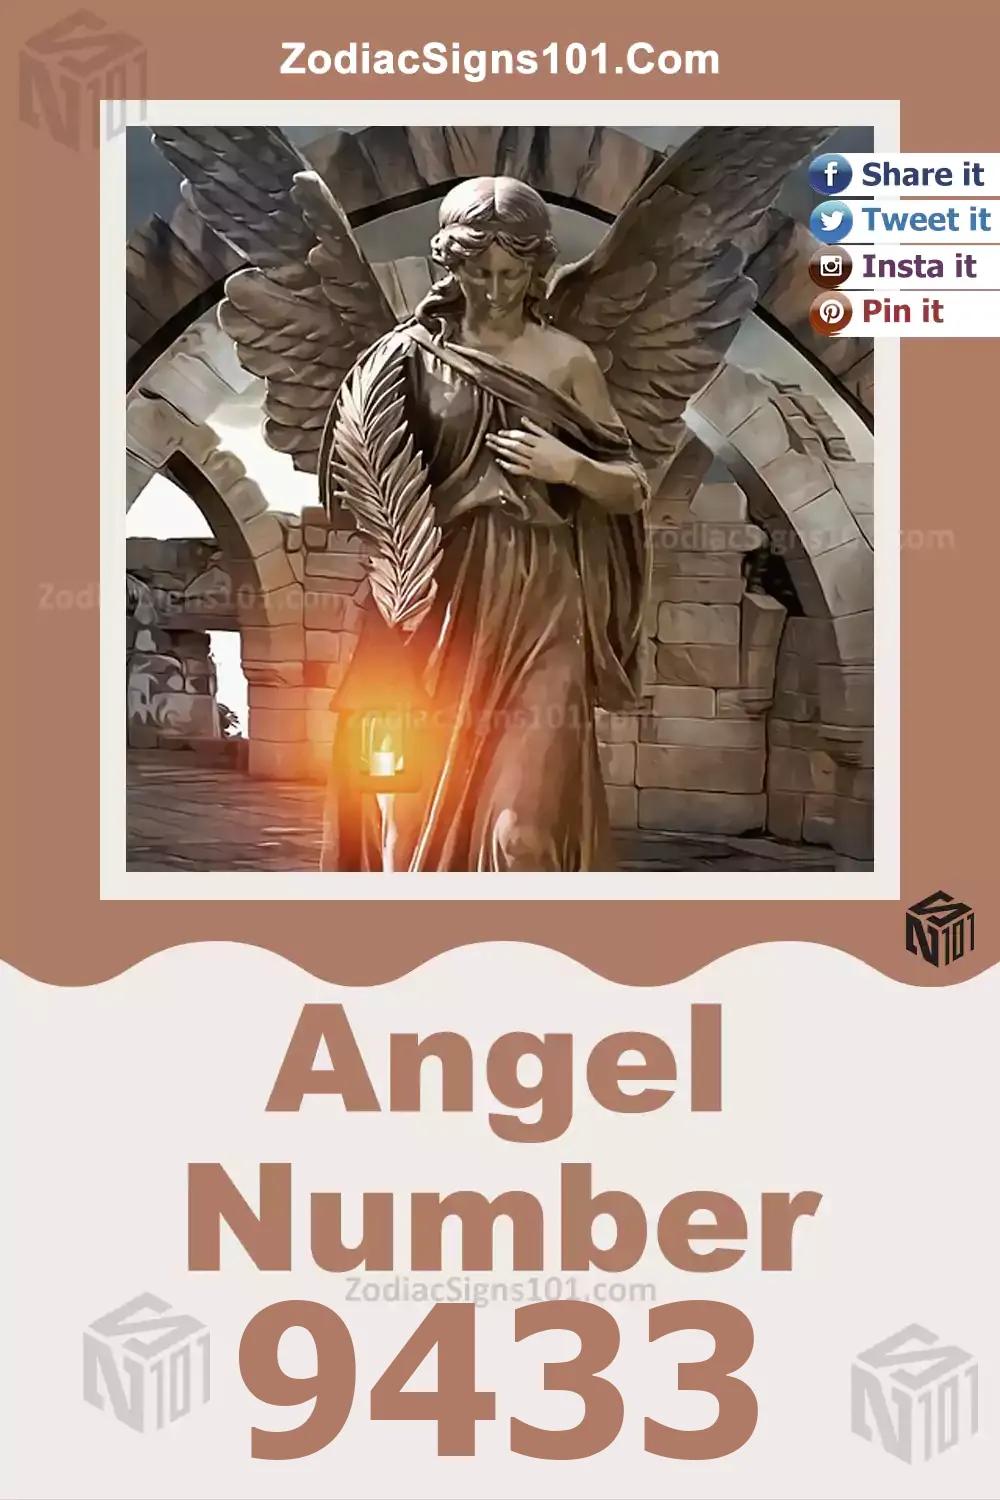 9433 Angel Number Meaning